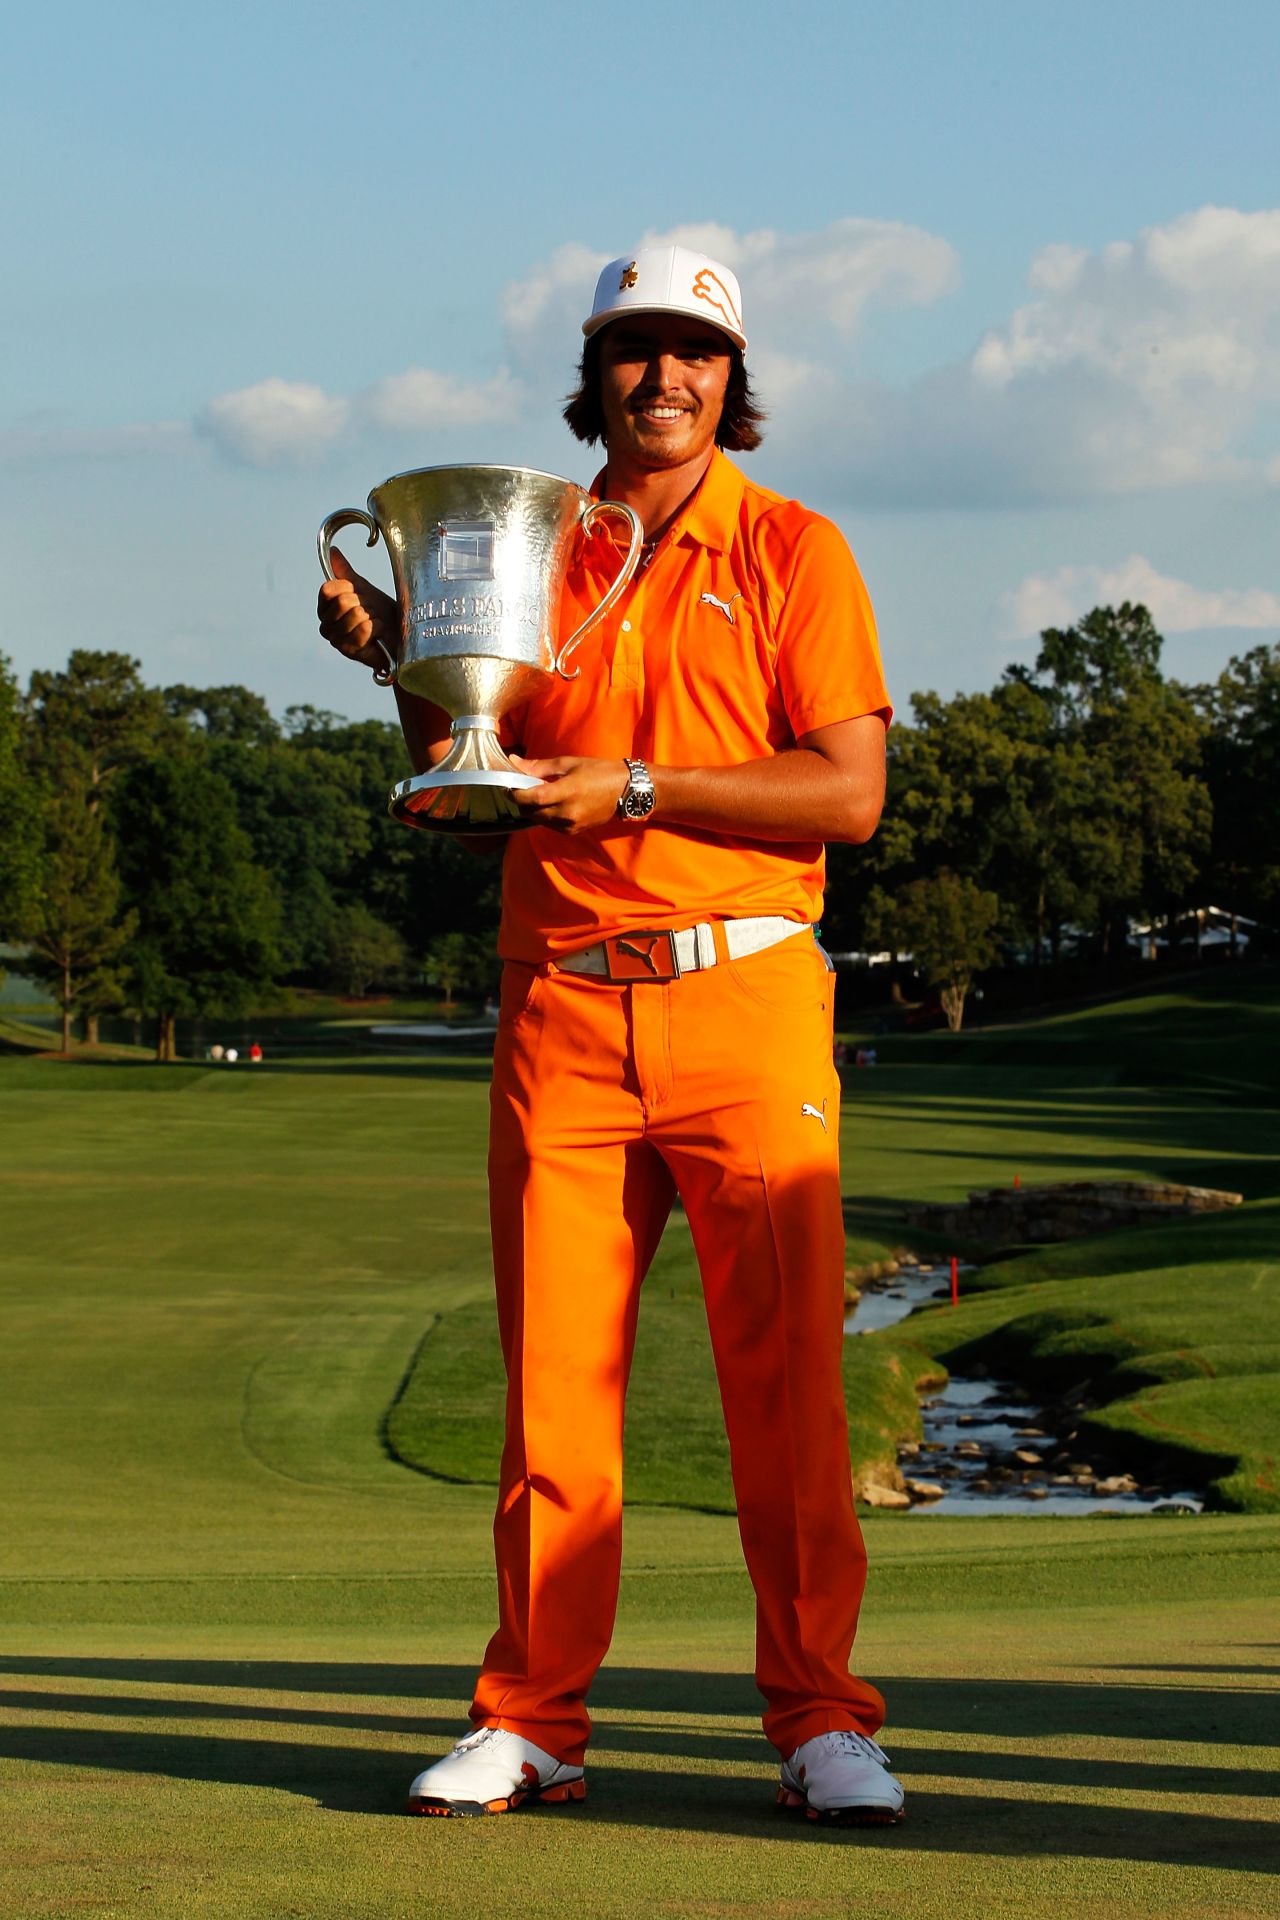 Fowler's first and only PGA Tour victory to date came at the 2012 Wells Fargo Championship, when he beat McIlroy in a playoff. The world No. 1 has had the better of their rivalry recently though, pipping Fowler to the 2014 British Open and the U.S. PGA Championship titles.